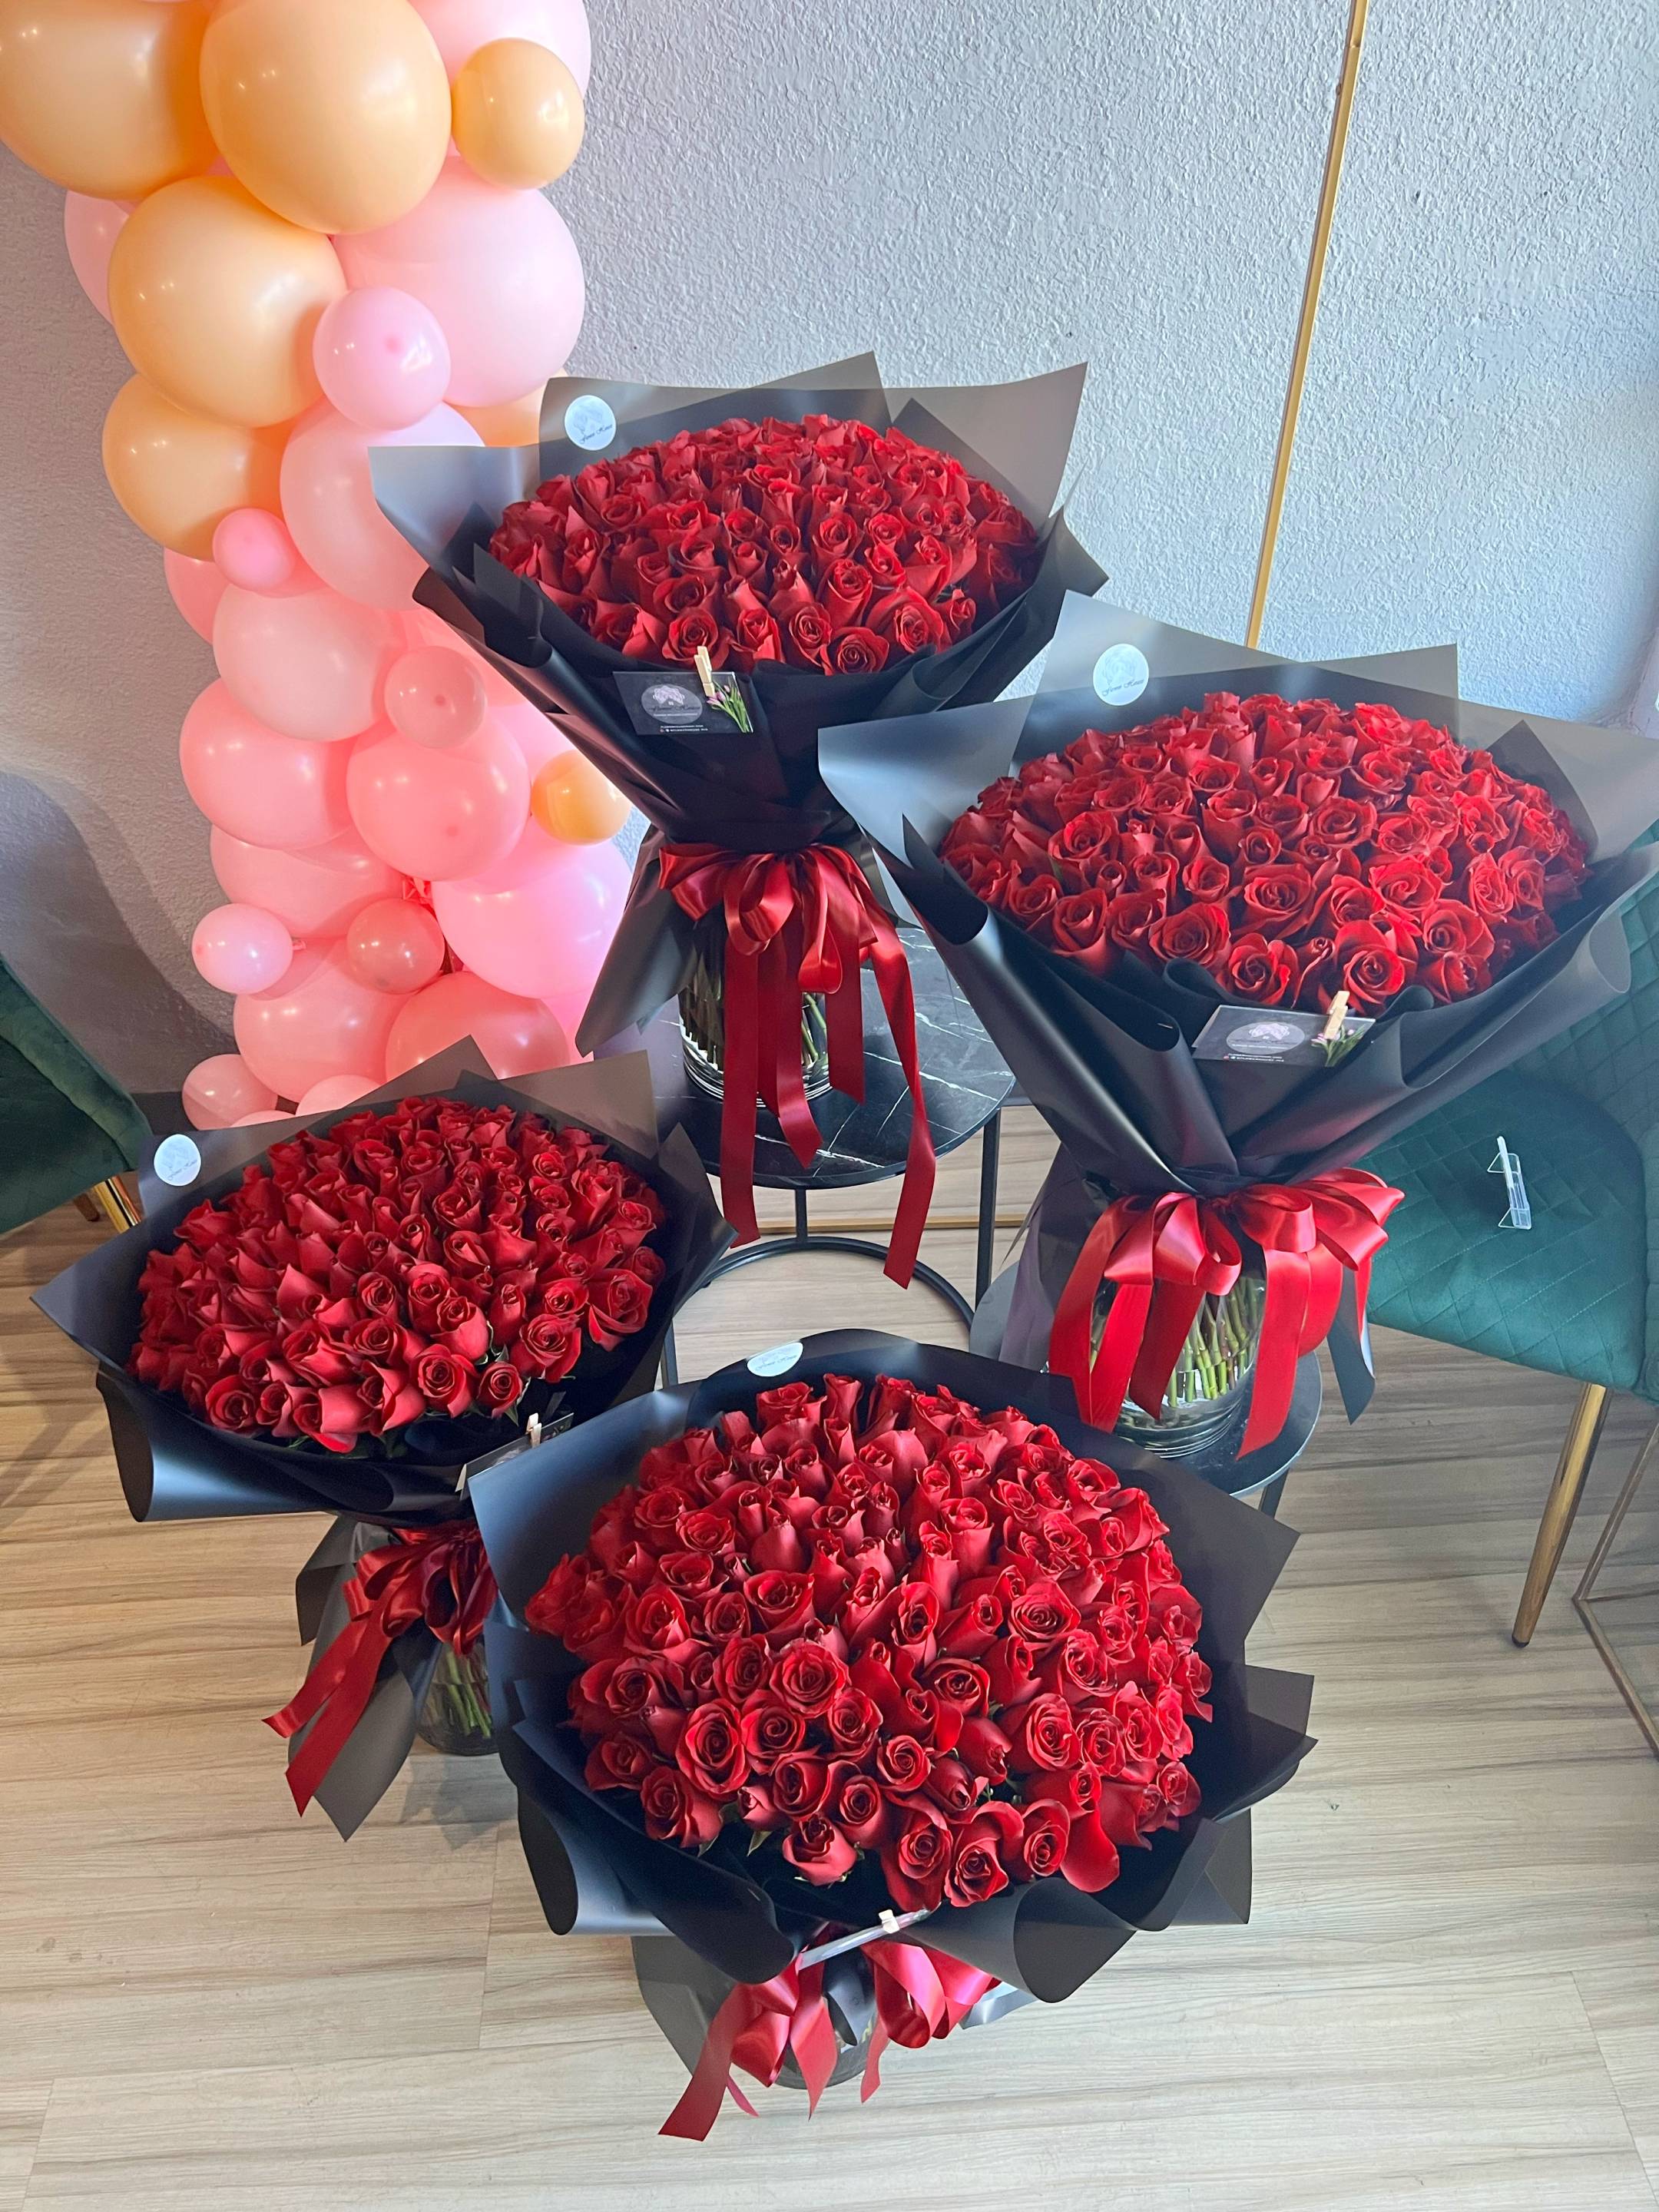 Basket of Red Roses  Basket of 40 Red Roses give to your love with nicely  decorated Ribbons